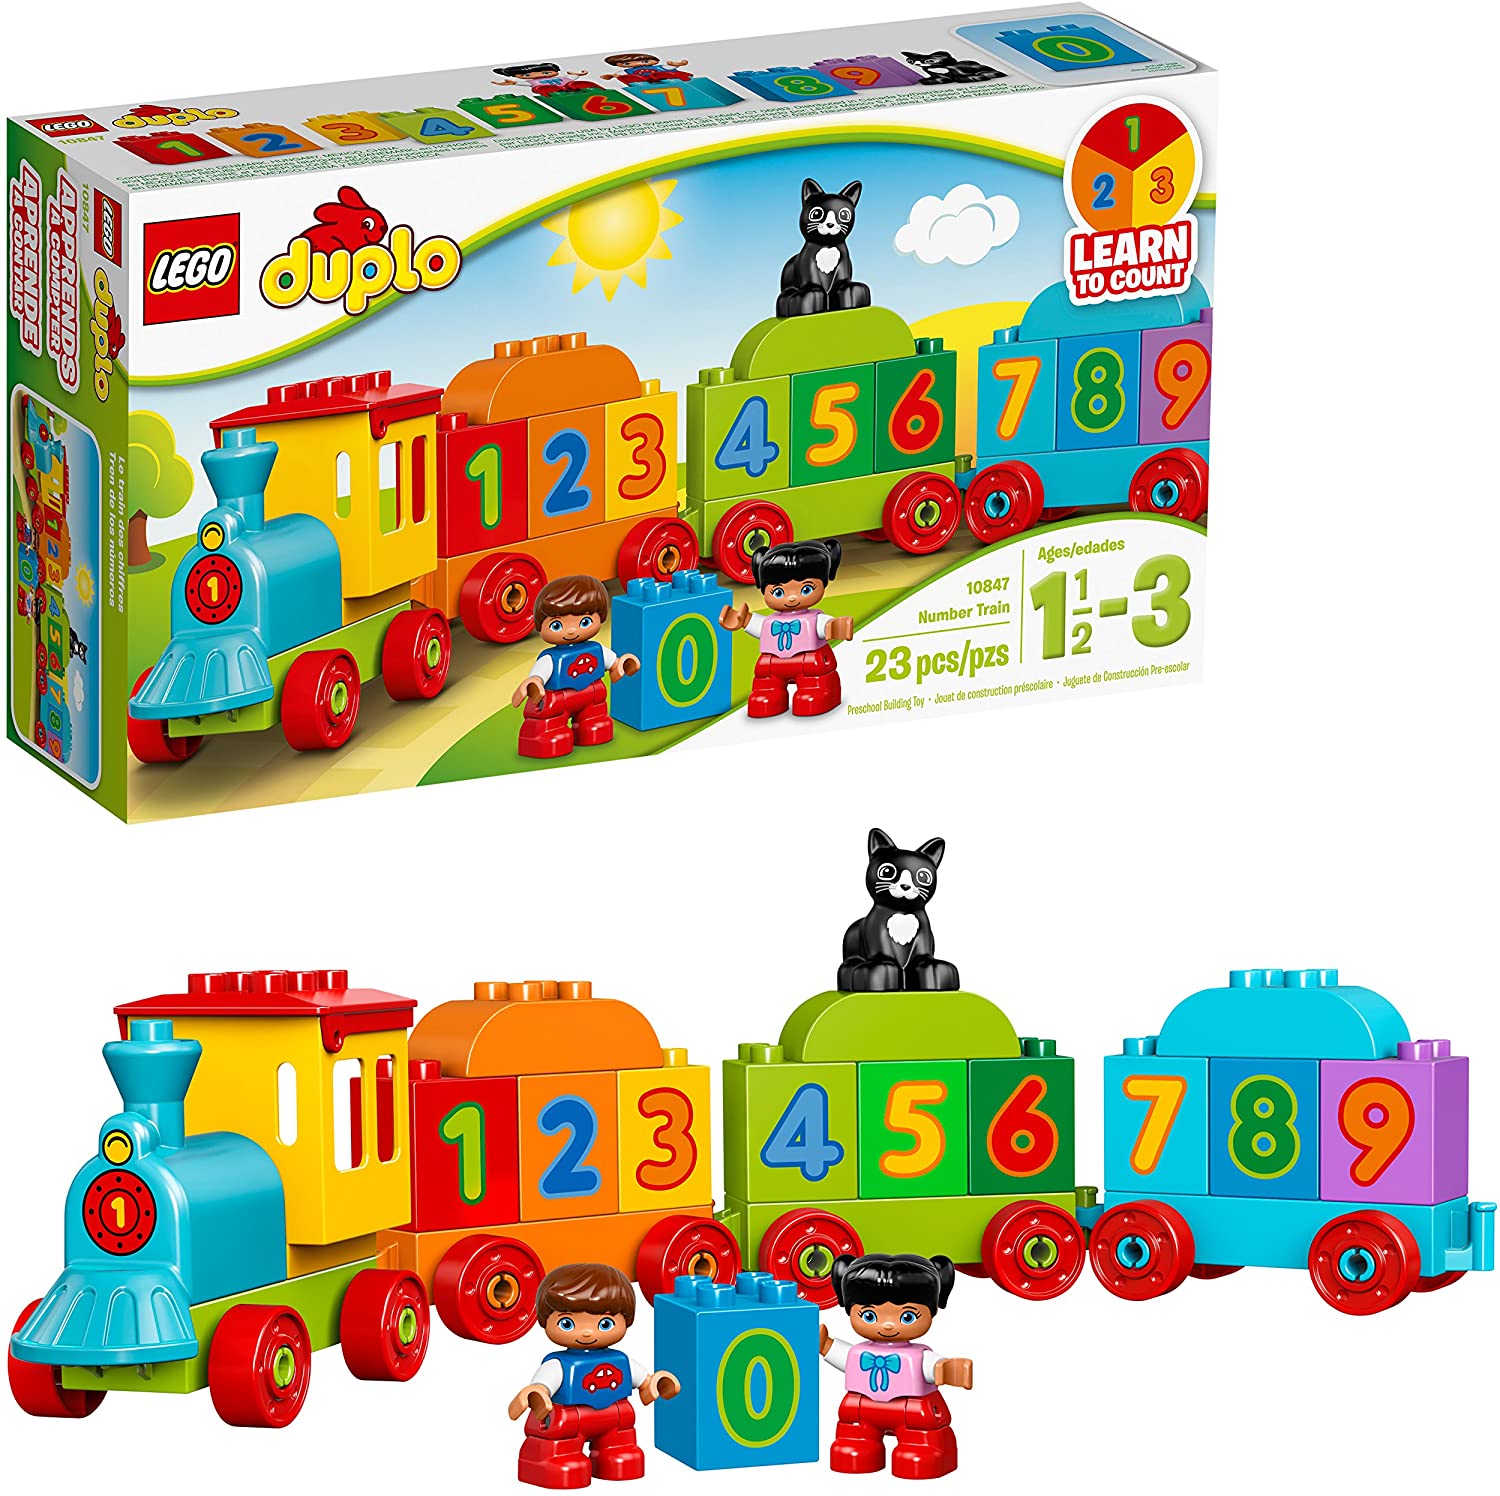 LEGO DUPLO My First Number Train Counting Set